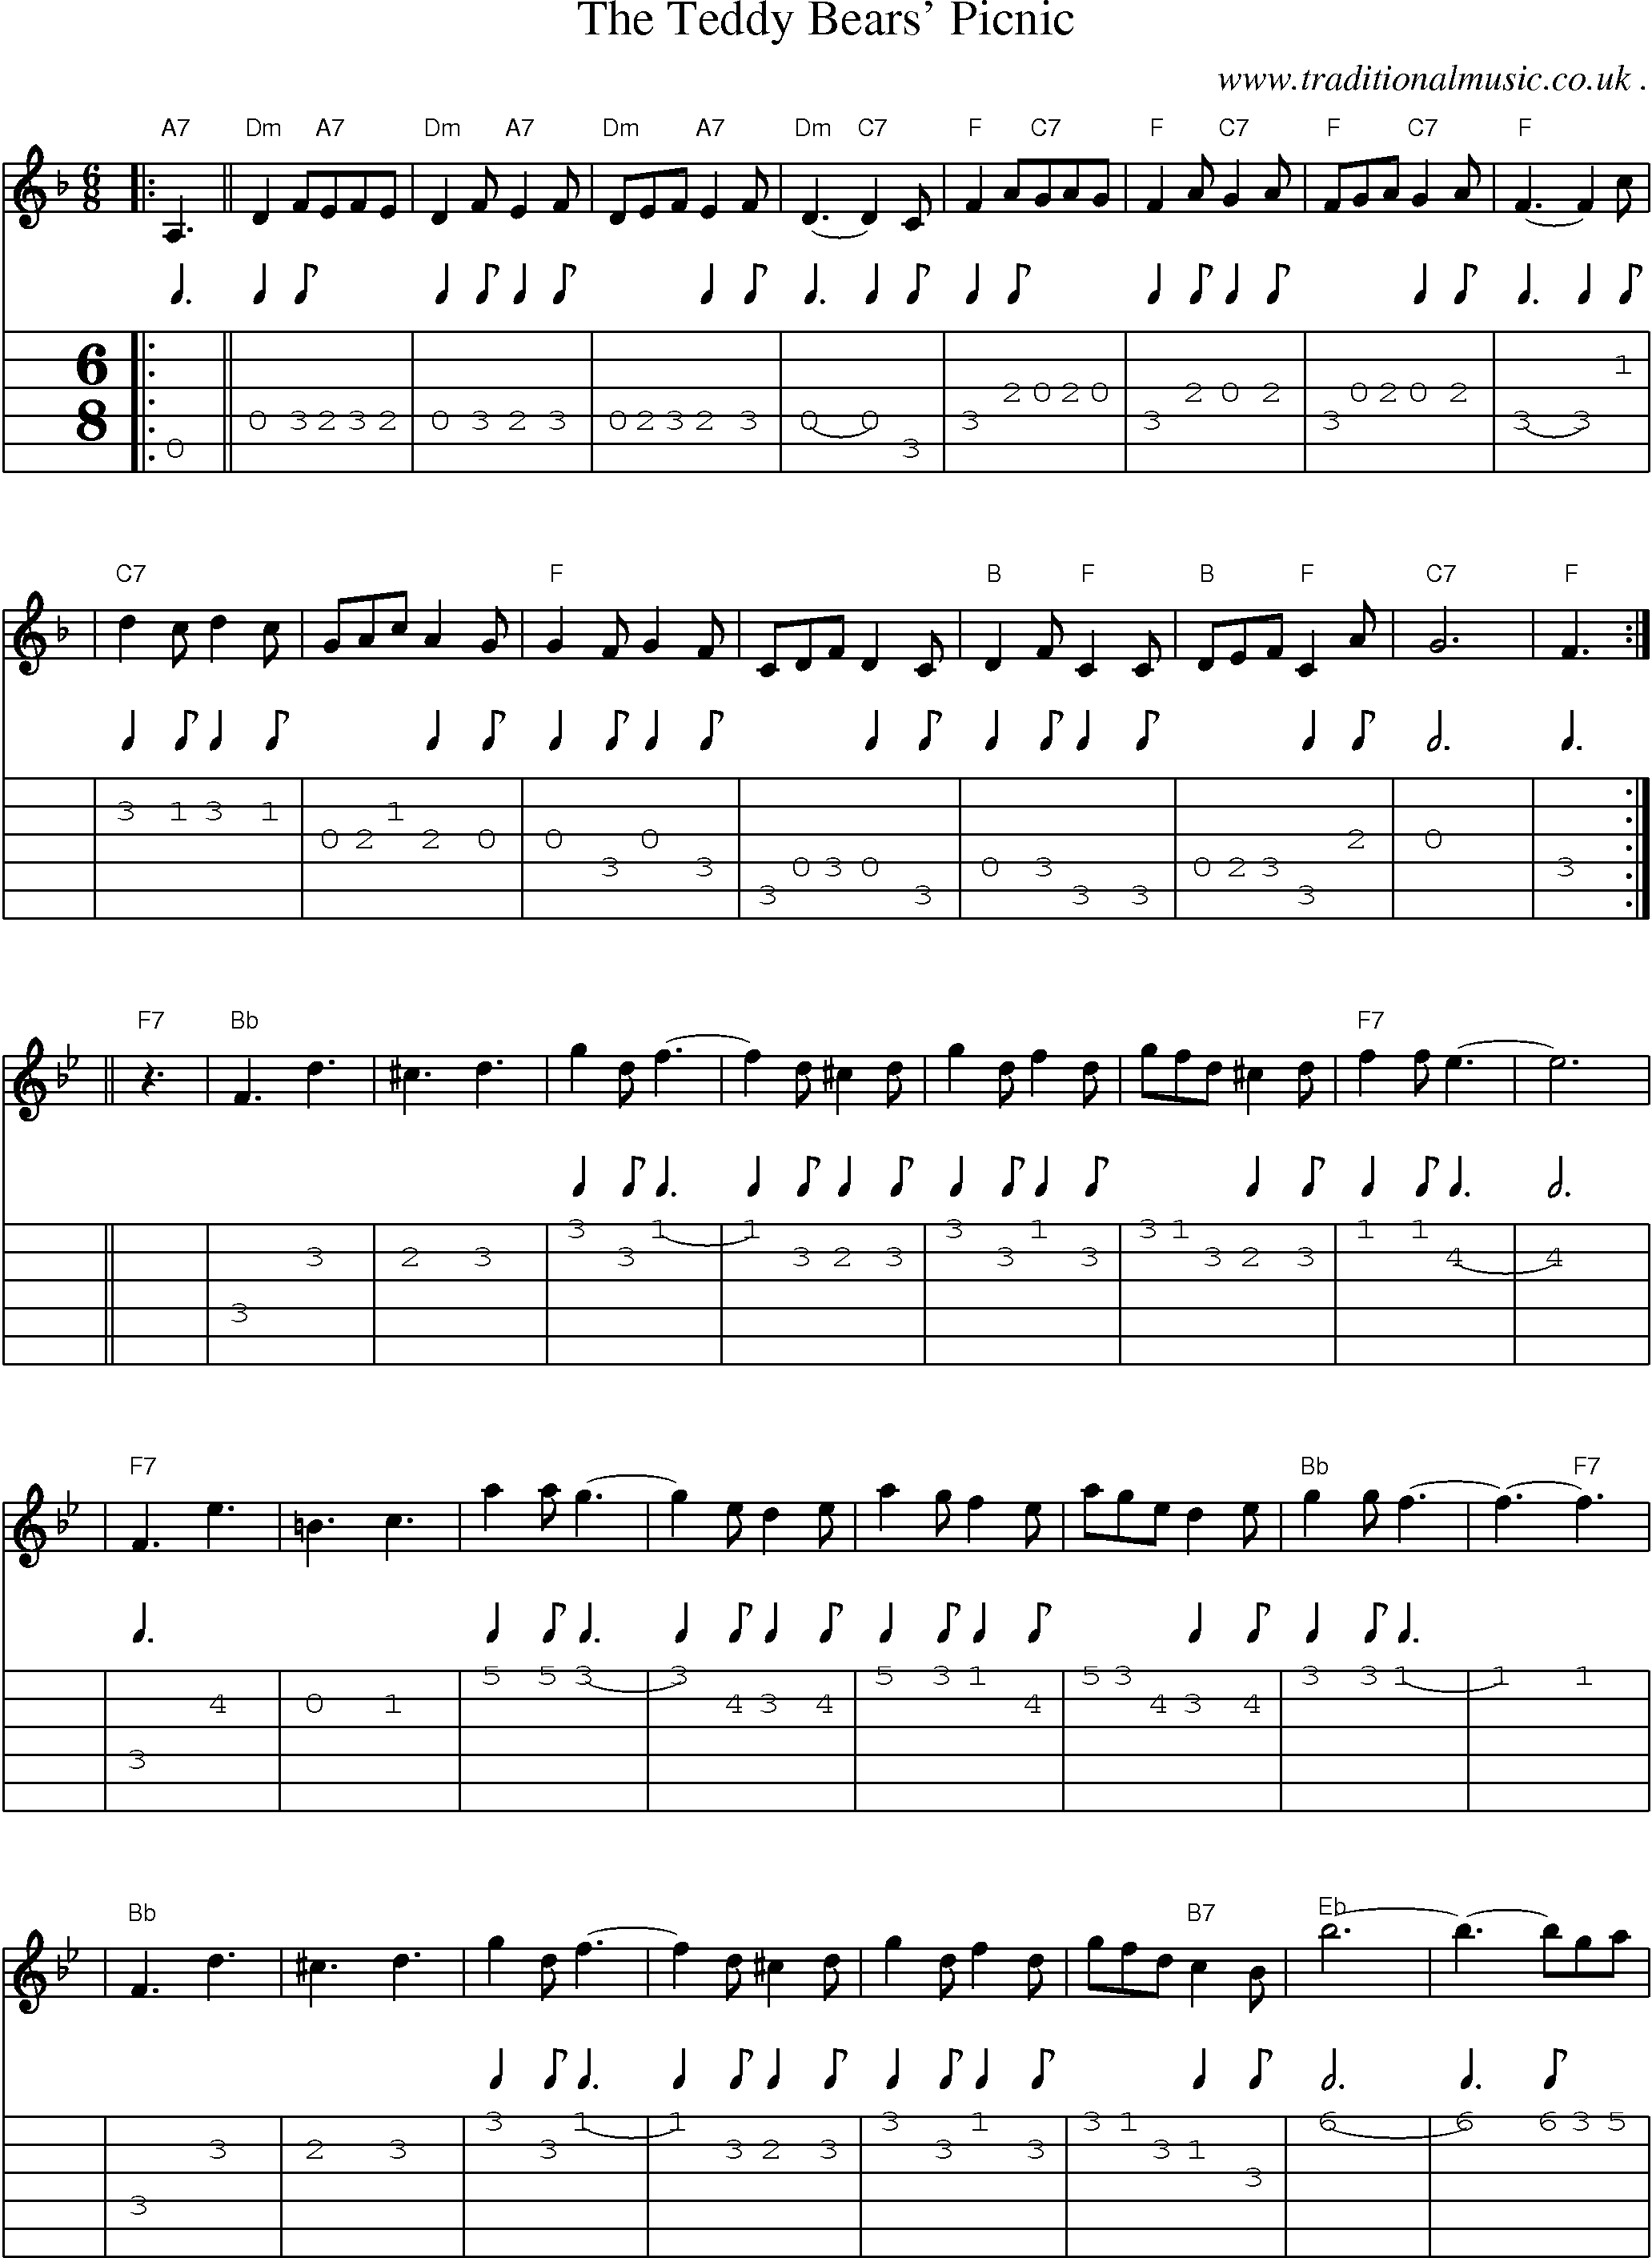 Sheet-Music and Guitar Tabs for The Teddy Bears Picnic